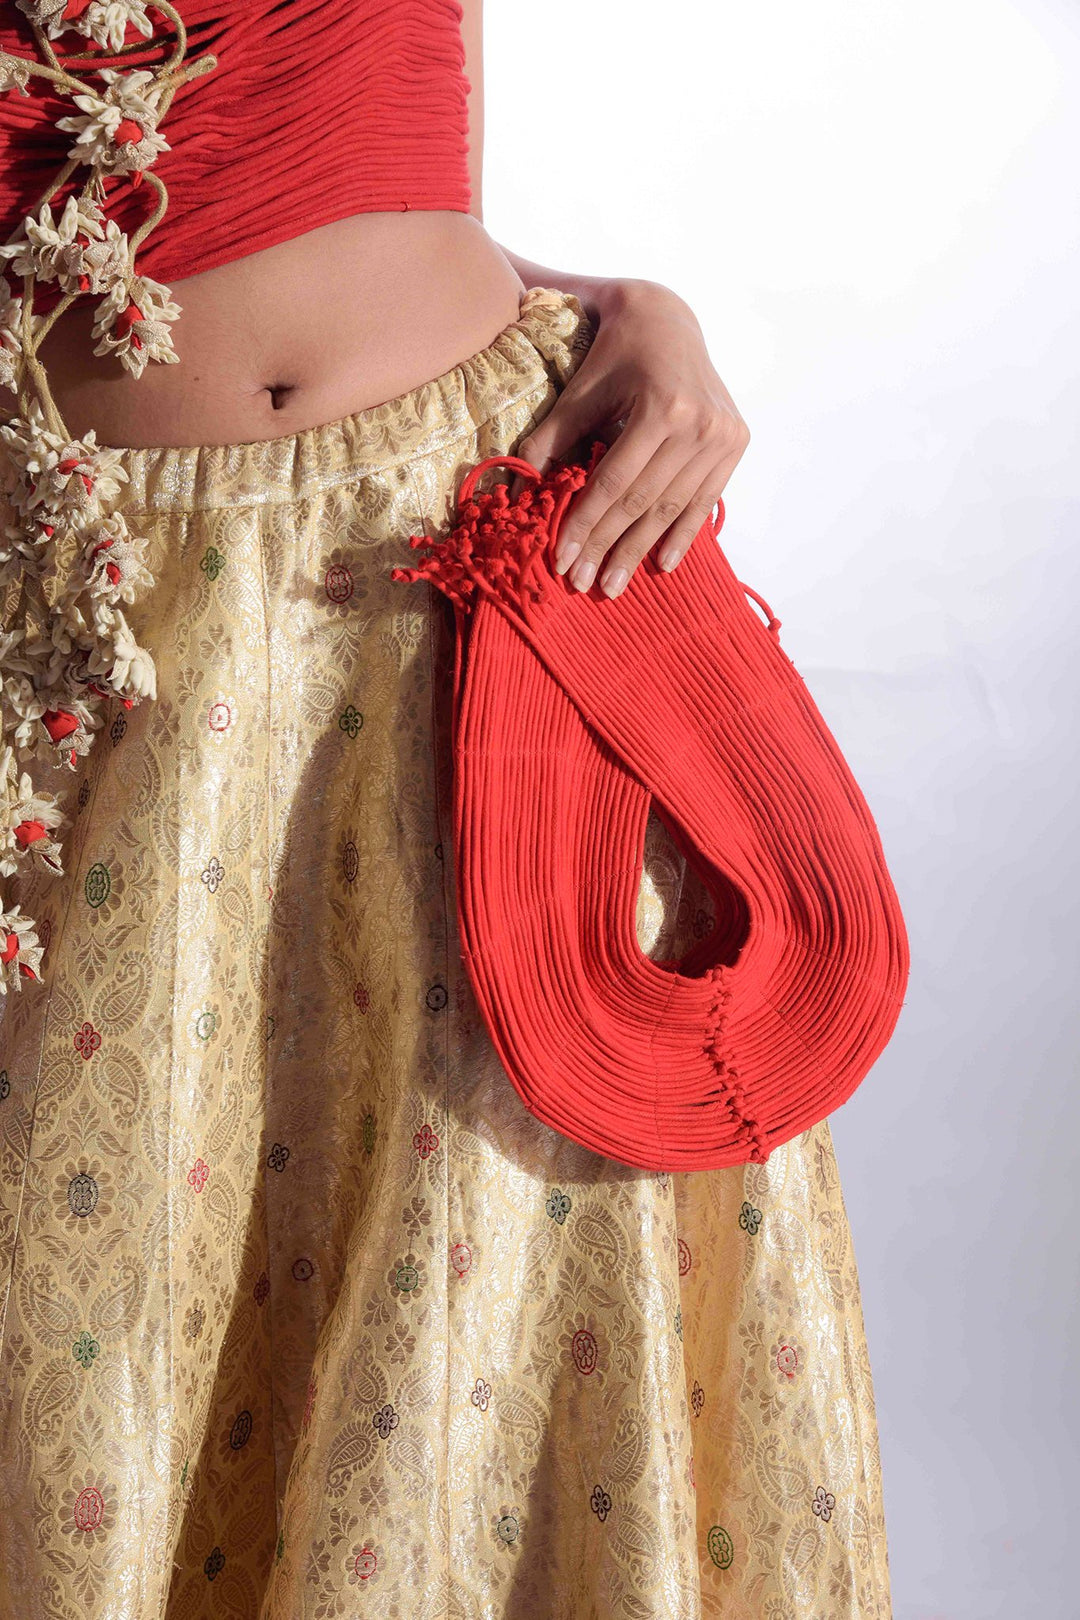 Red Corded Bag